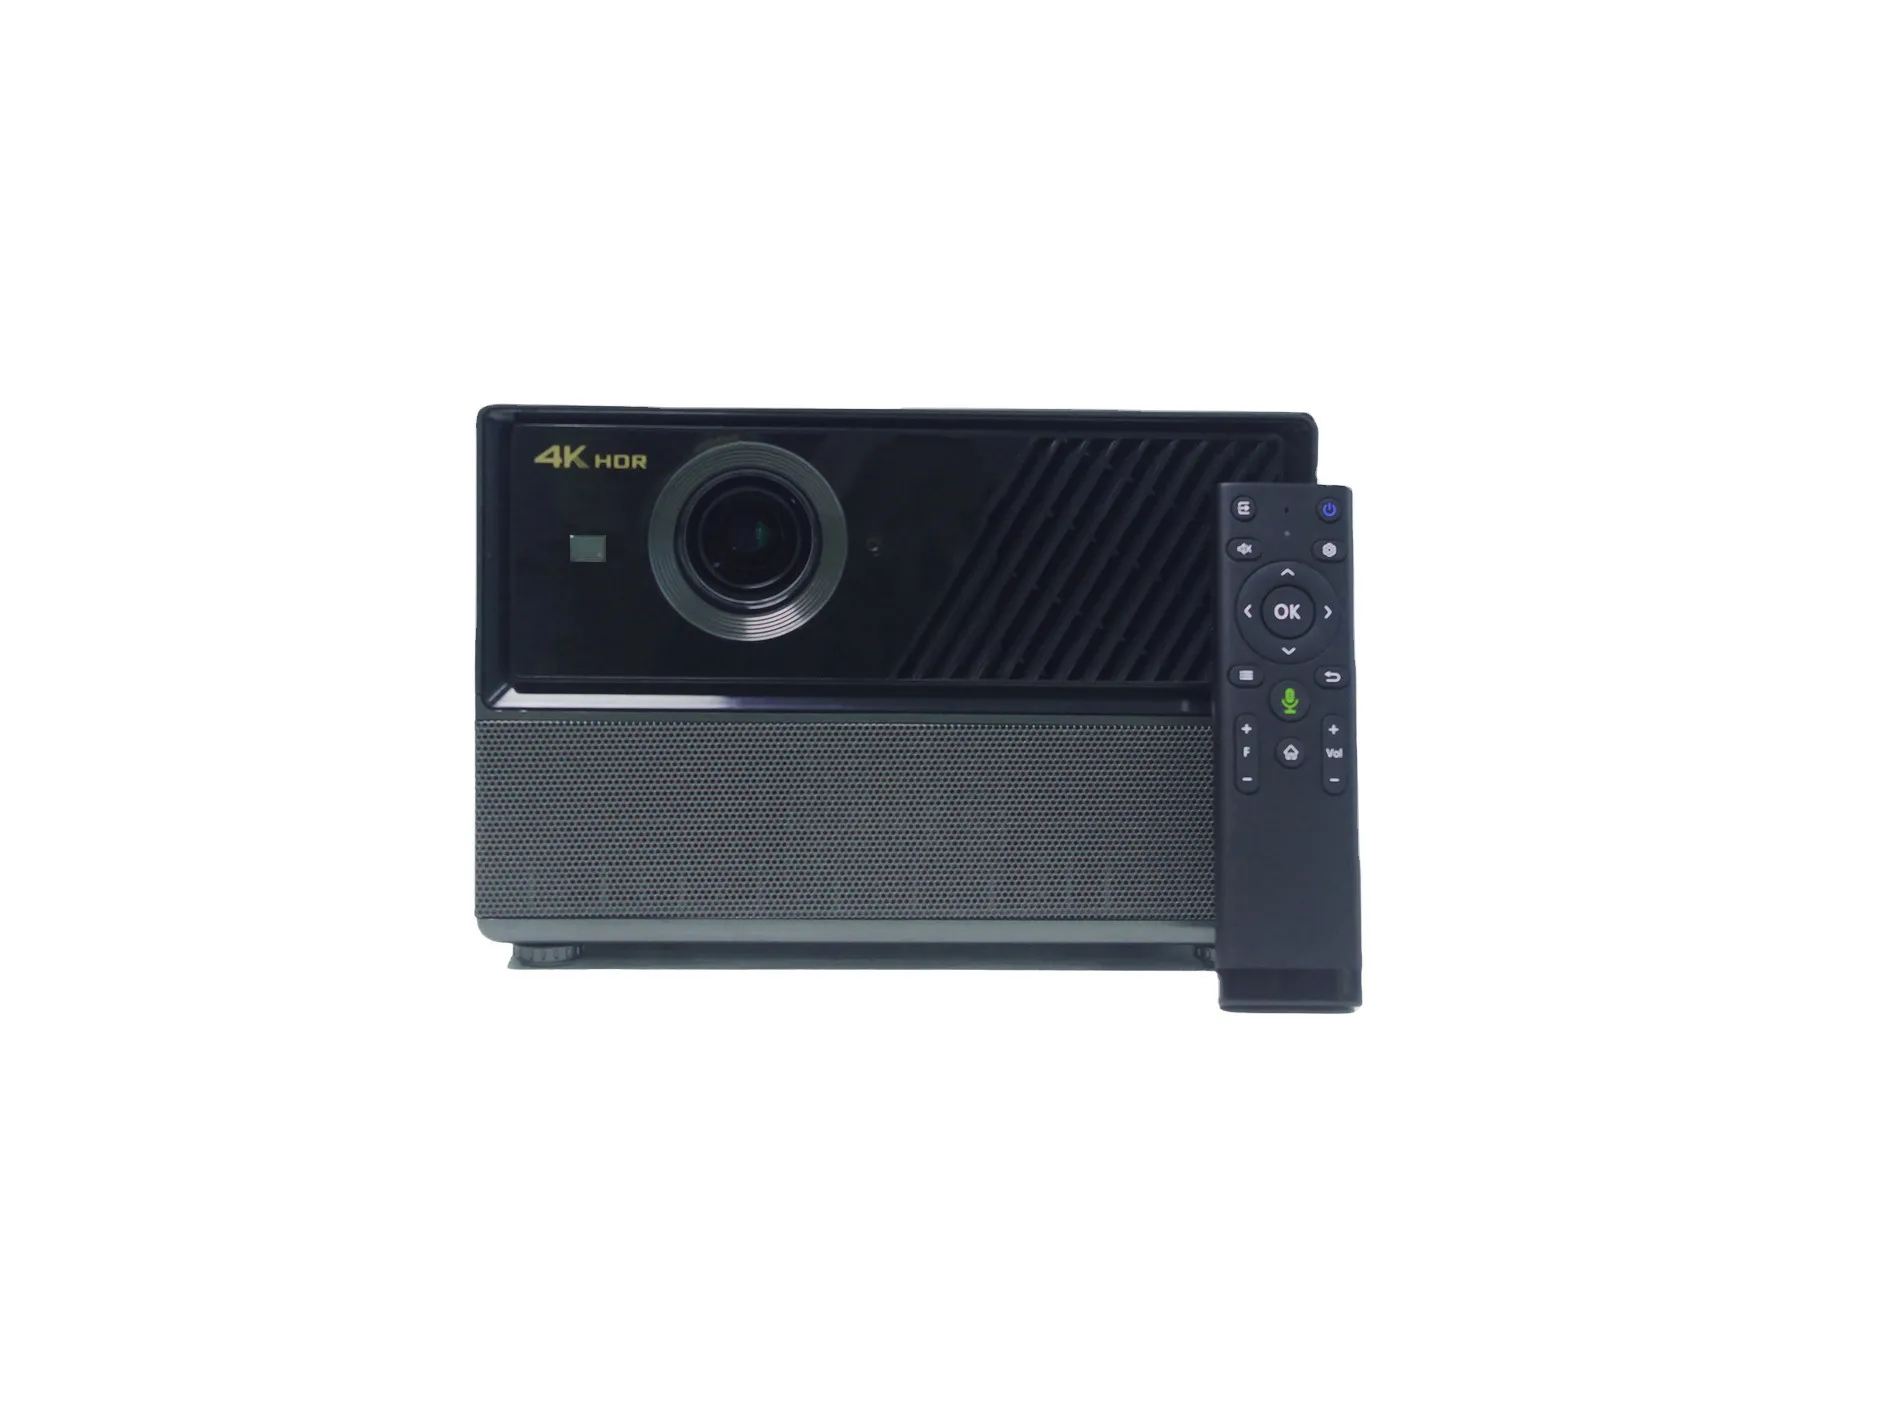 Flyin -200K Large Venue True 4K 3D LCD Laser Light Source Home Theater Cooling New Image Colorful Projector